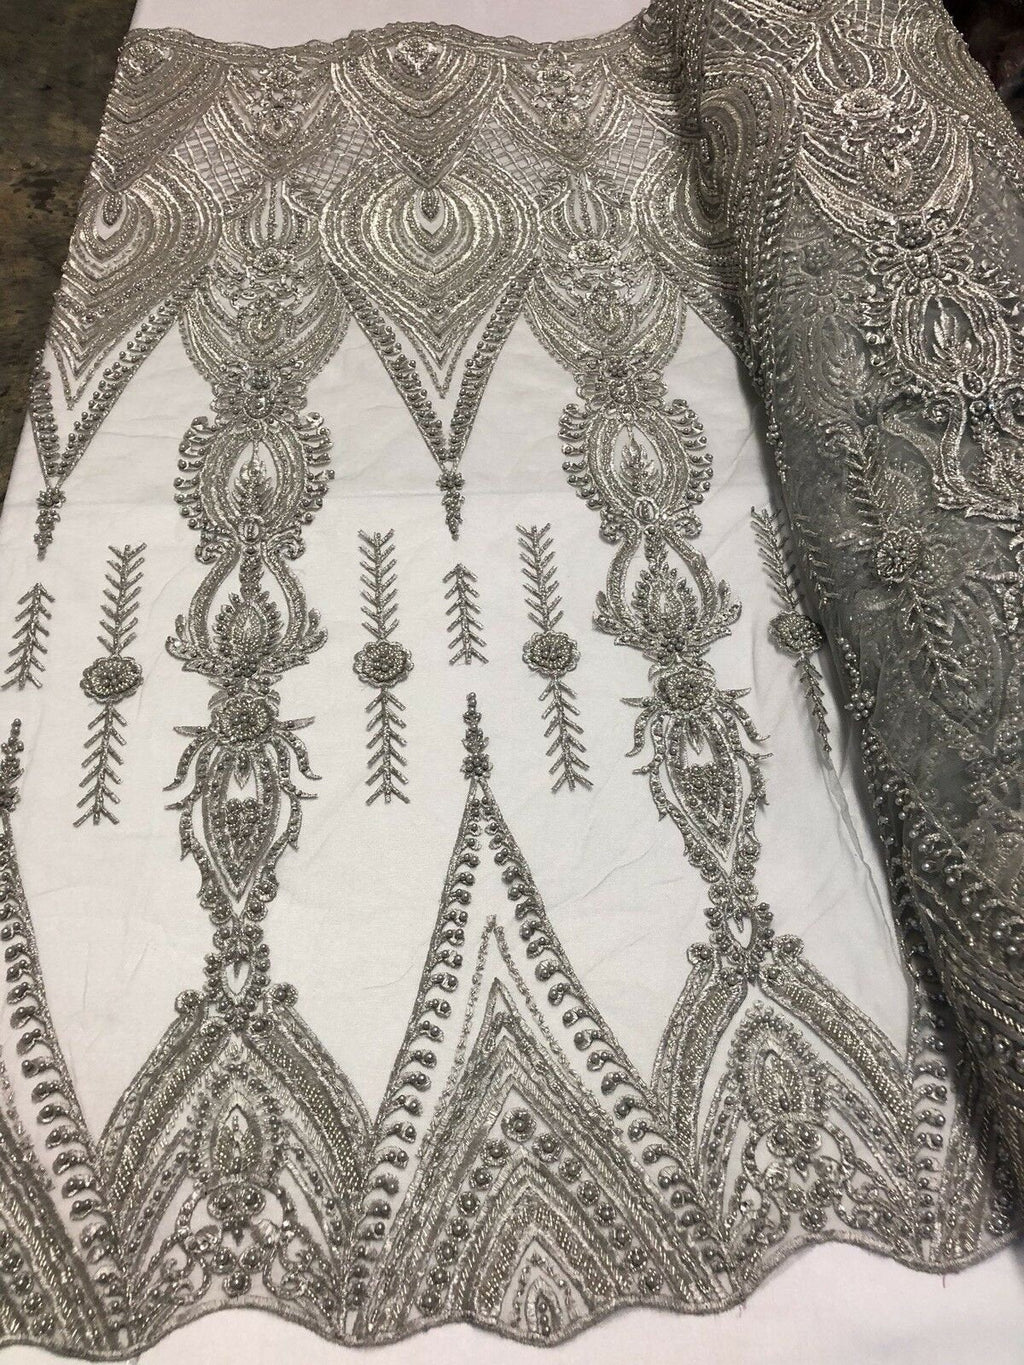 Silver Beaded Embroidered Fancy Damask Spikes Pattern Fabric - Embroid